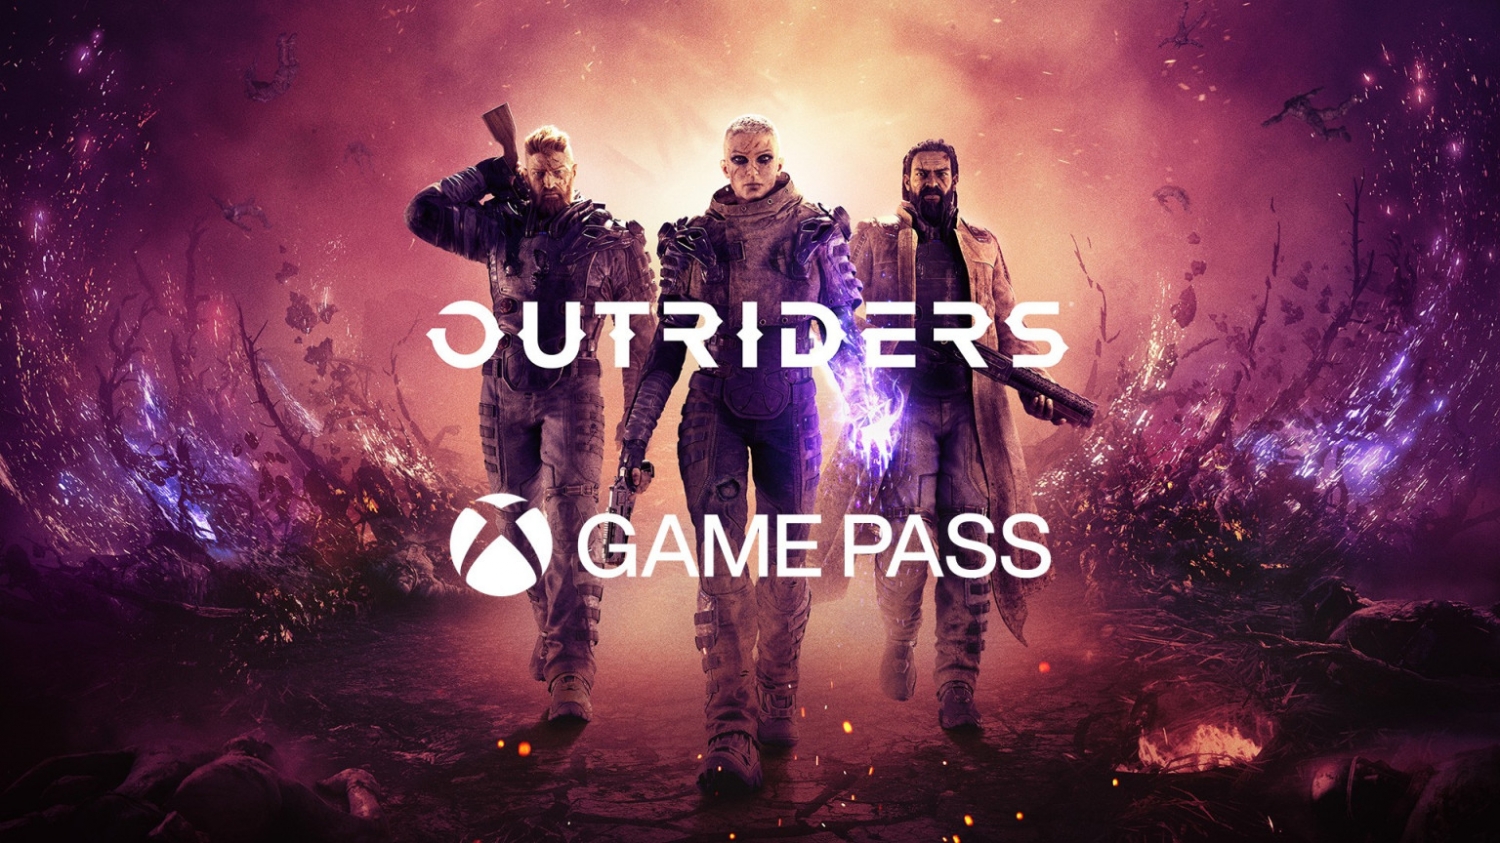 is outriders on pc game pass